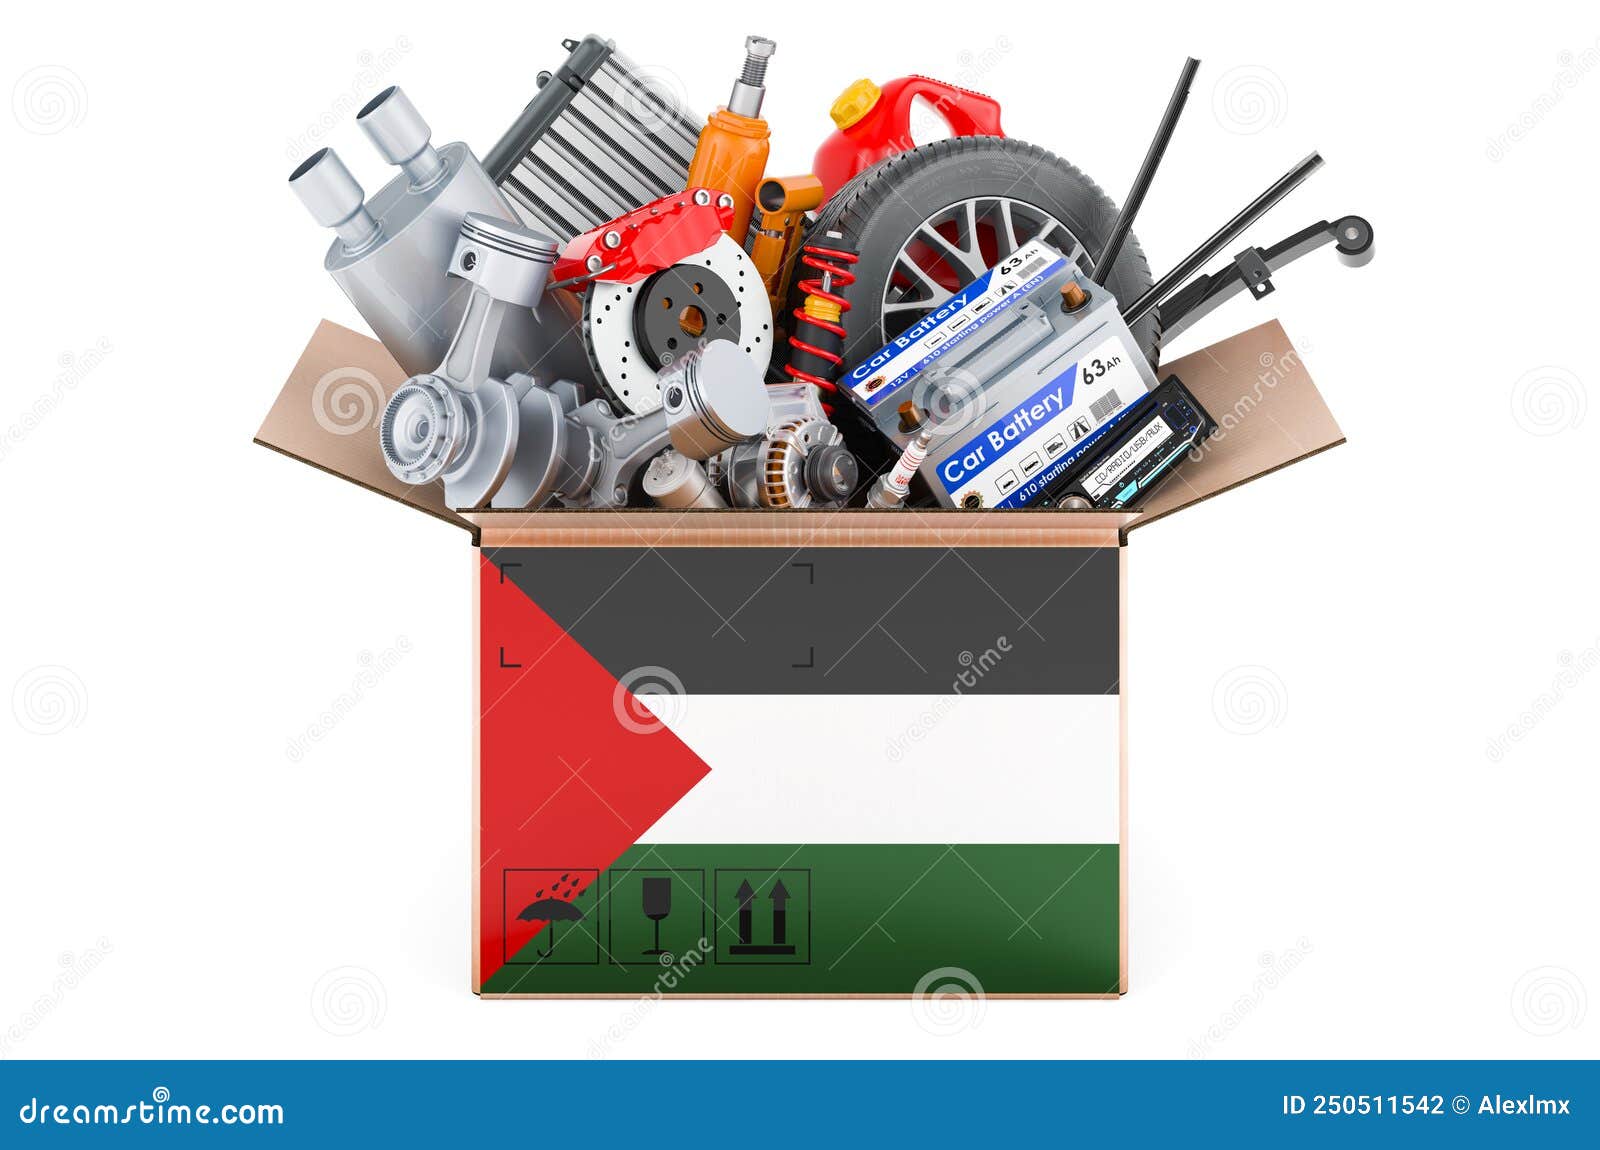 Palestinian Flag Painted on the Parcel with Car Parts. 3D